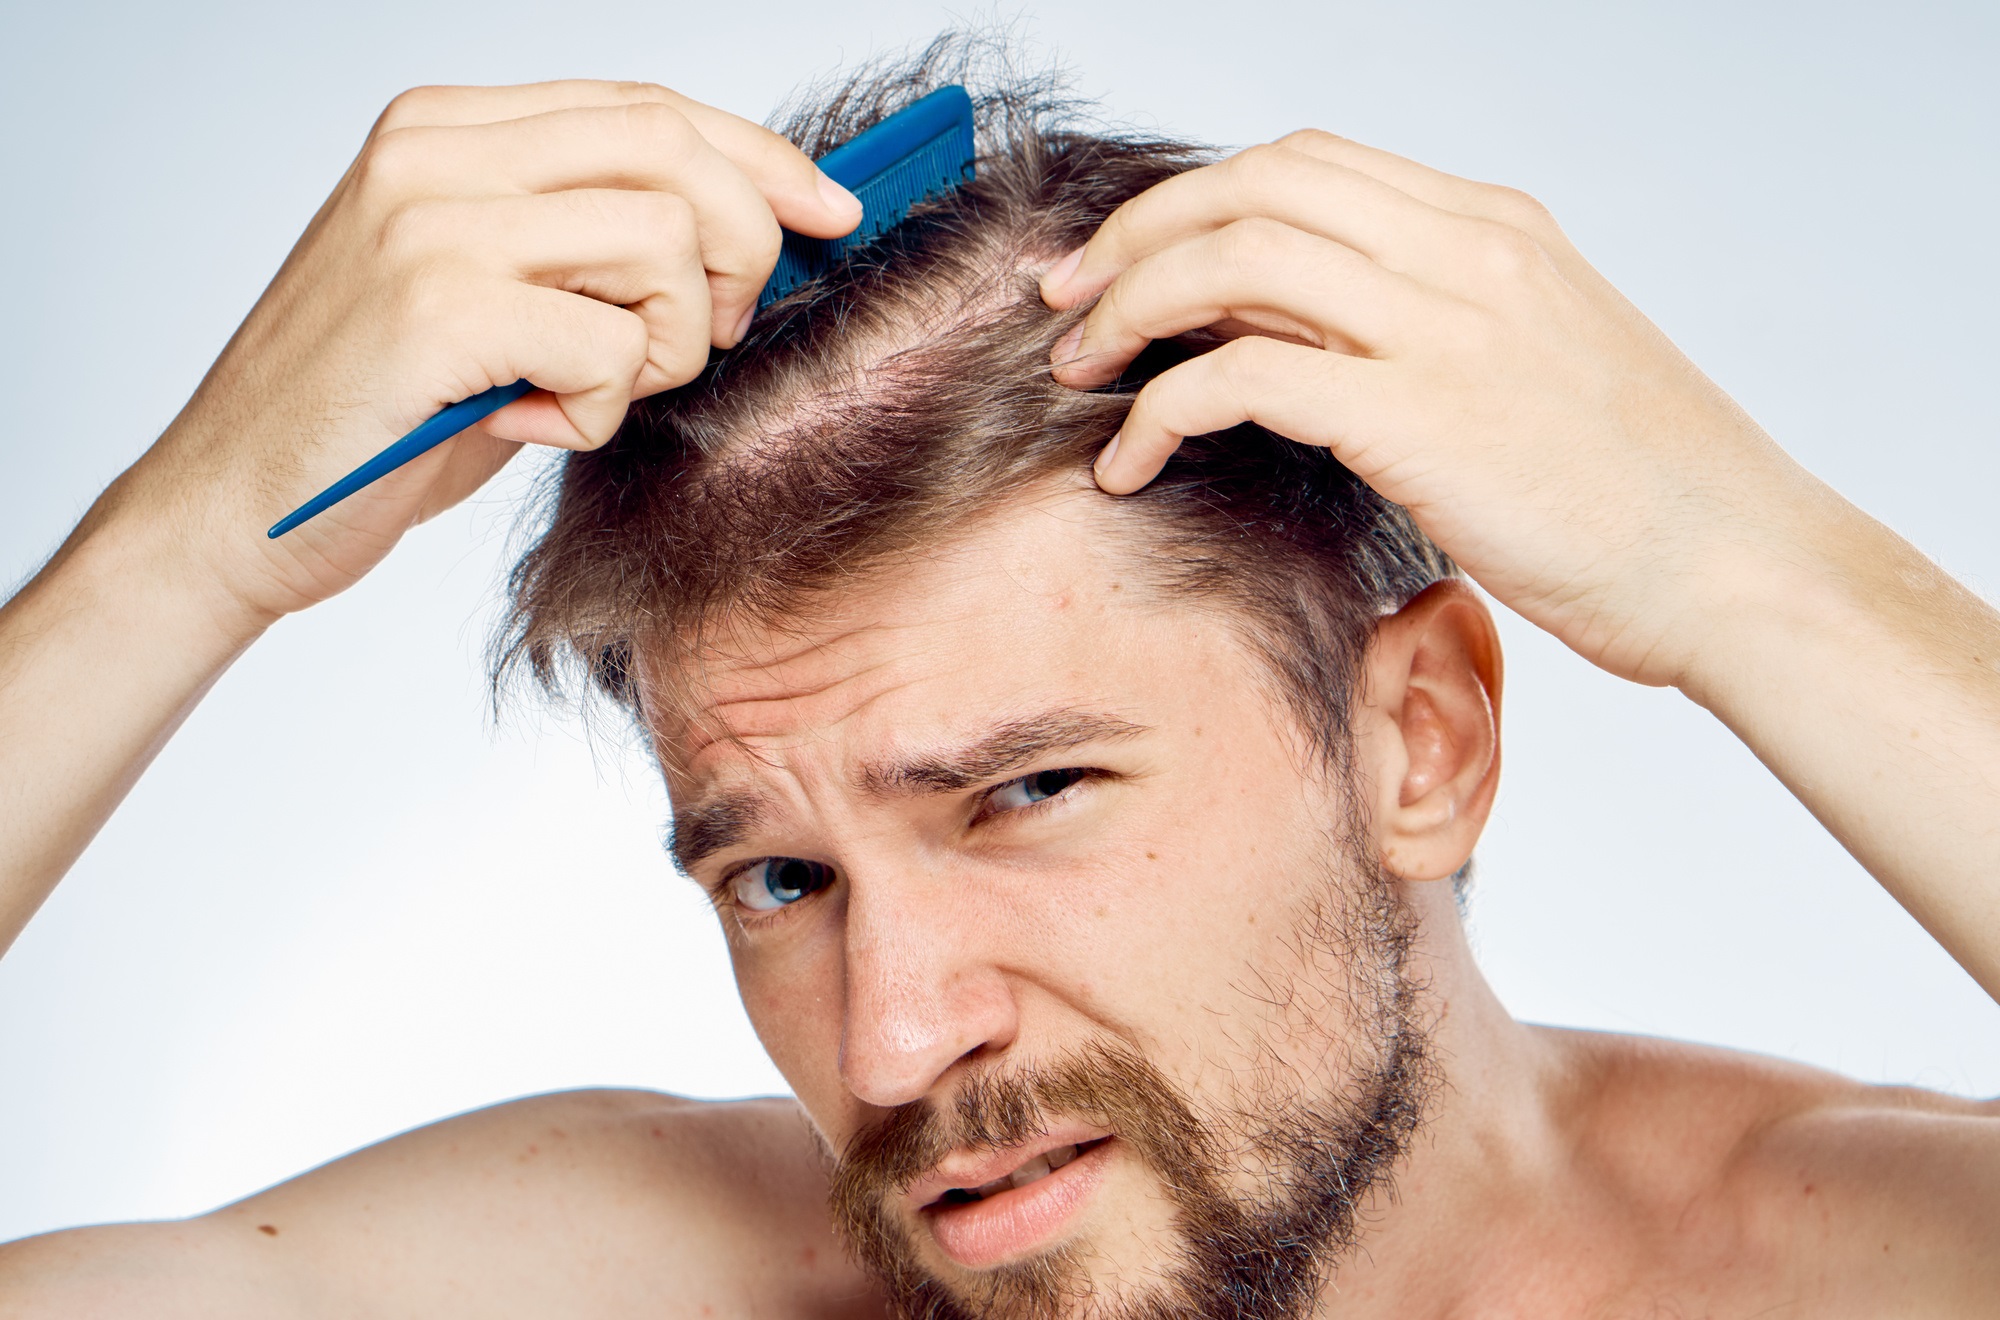 Scientists Have Made a Breakthrough Towards Curing Baldness